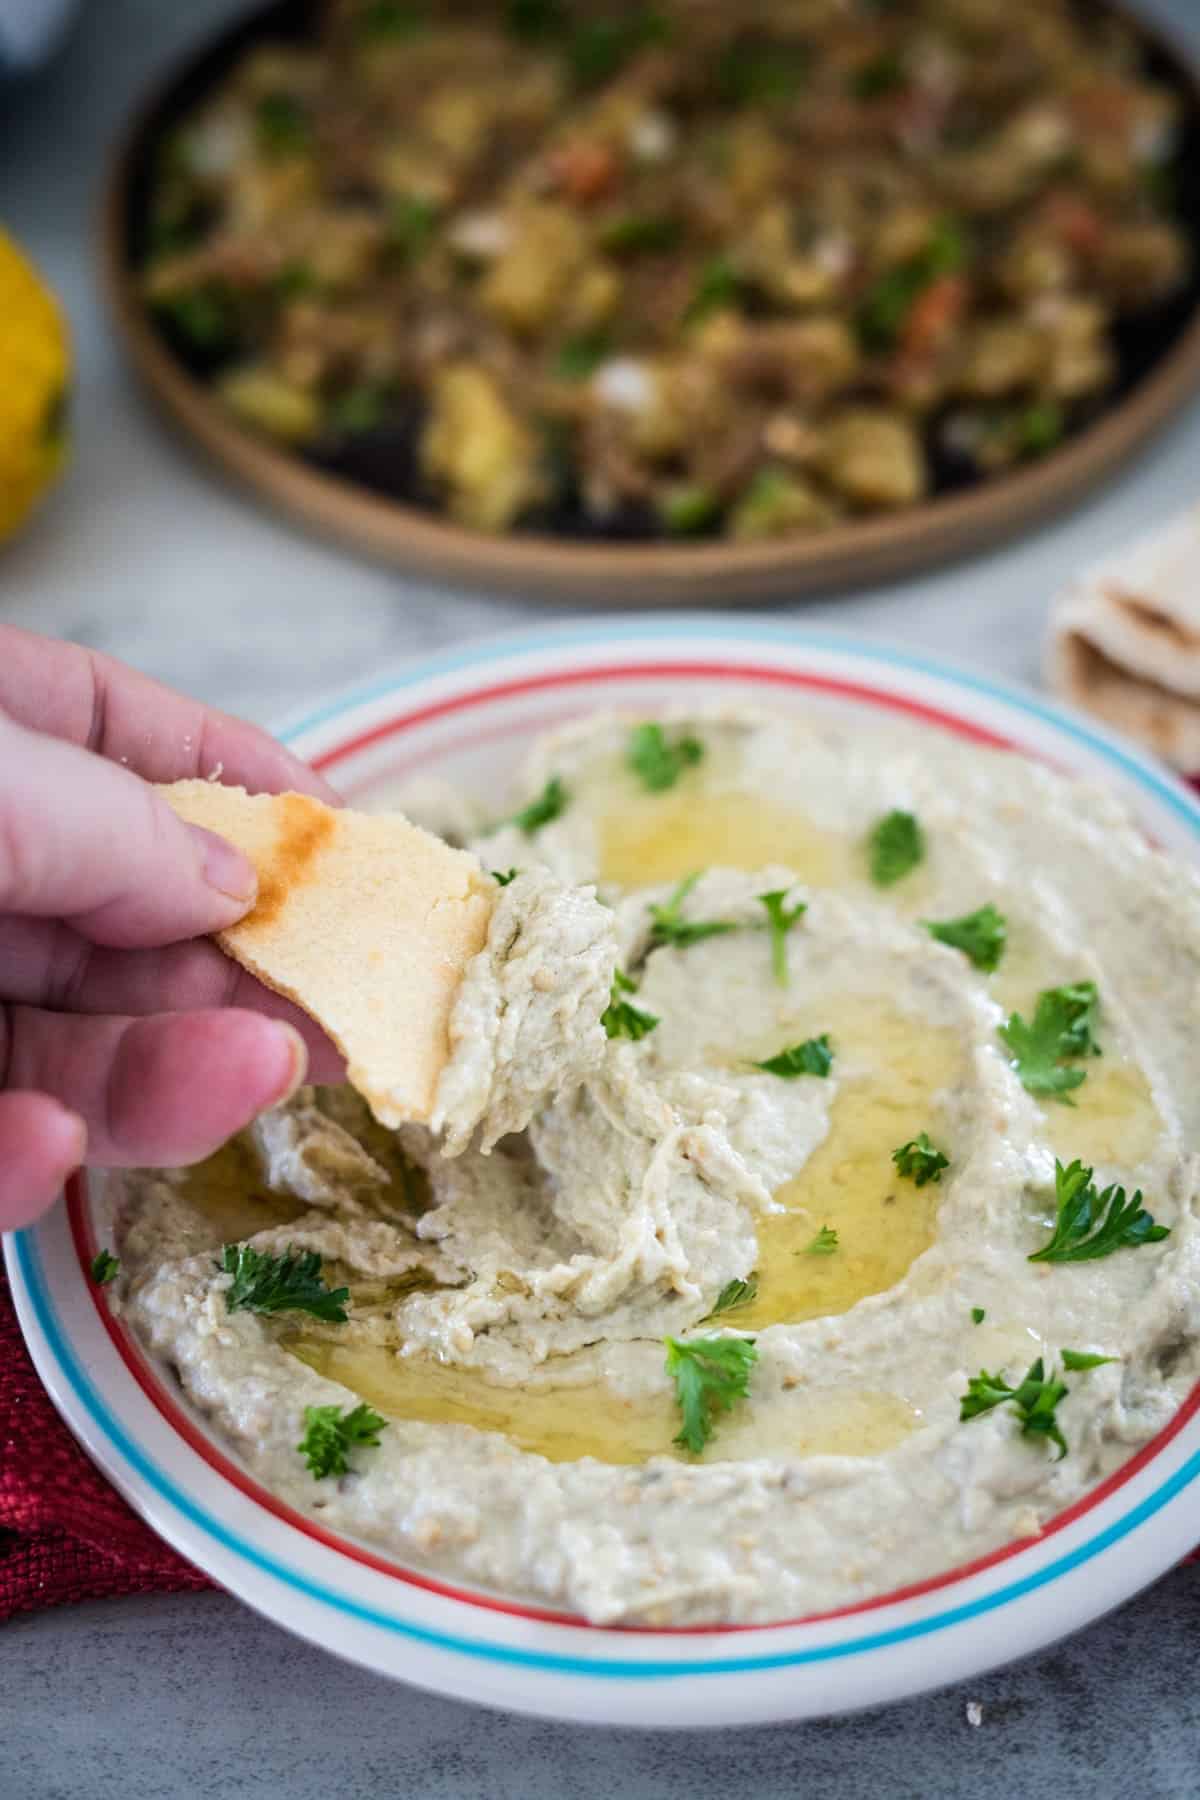 Hand dipping pita bread into a bowl of hummus garnished with olive oil and parsley.